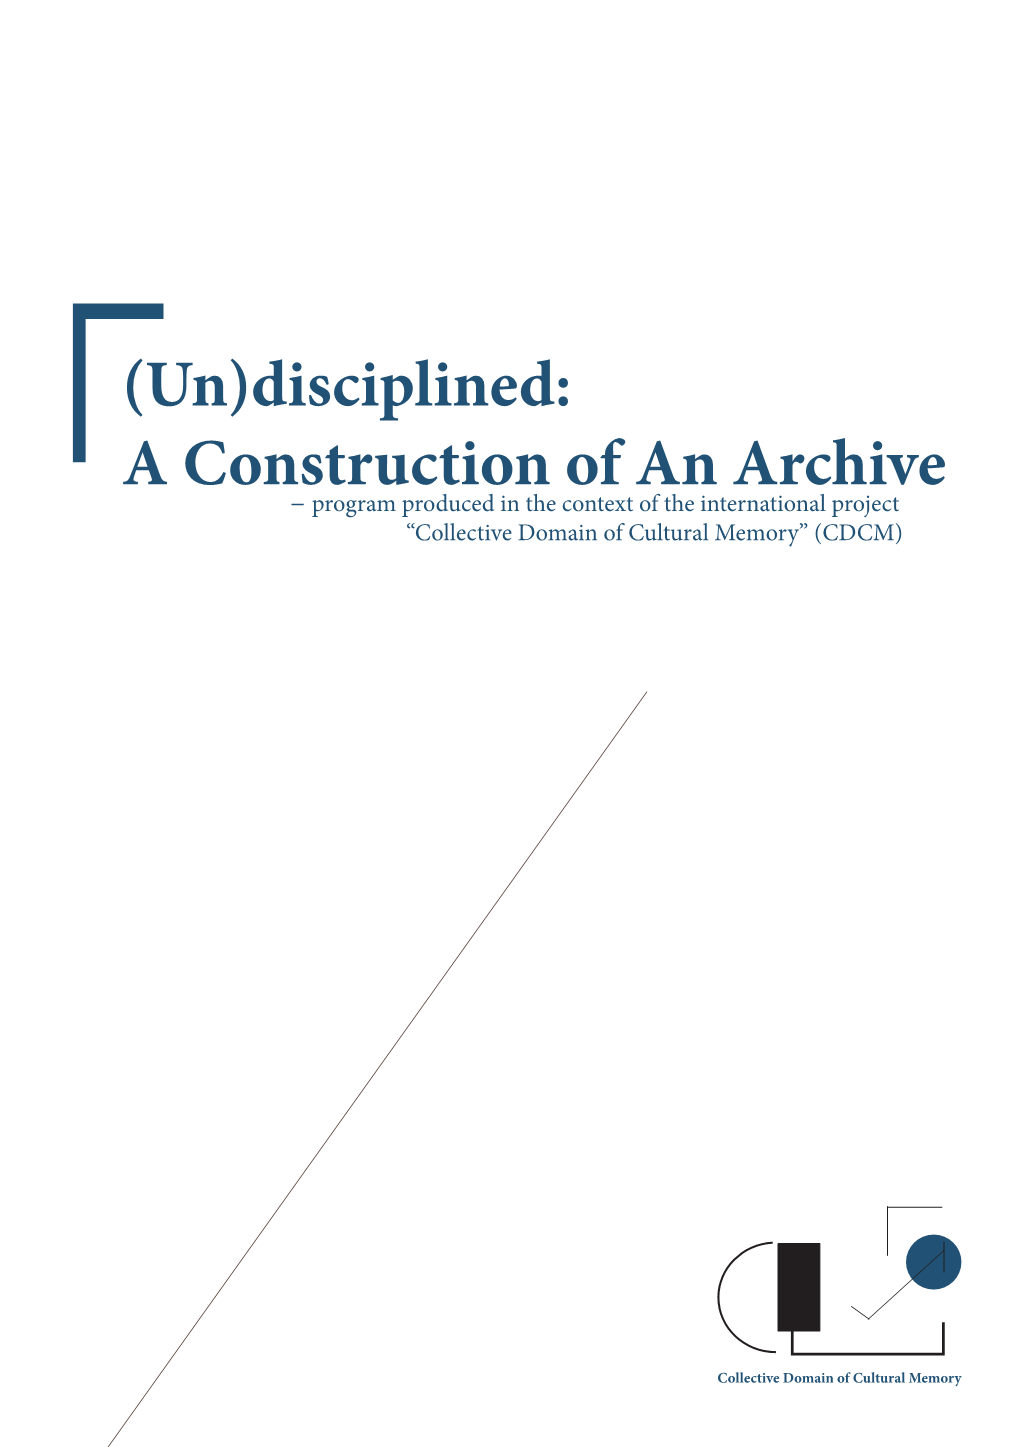 Un)Disciplined: a Construction of an Archive – Program Produced in the Context of the International Project “Collective Domain of Cultural Memory” (CDCM)